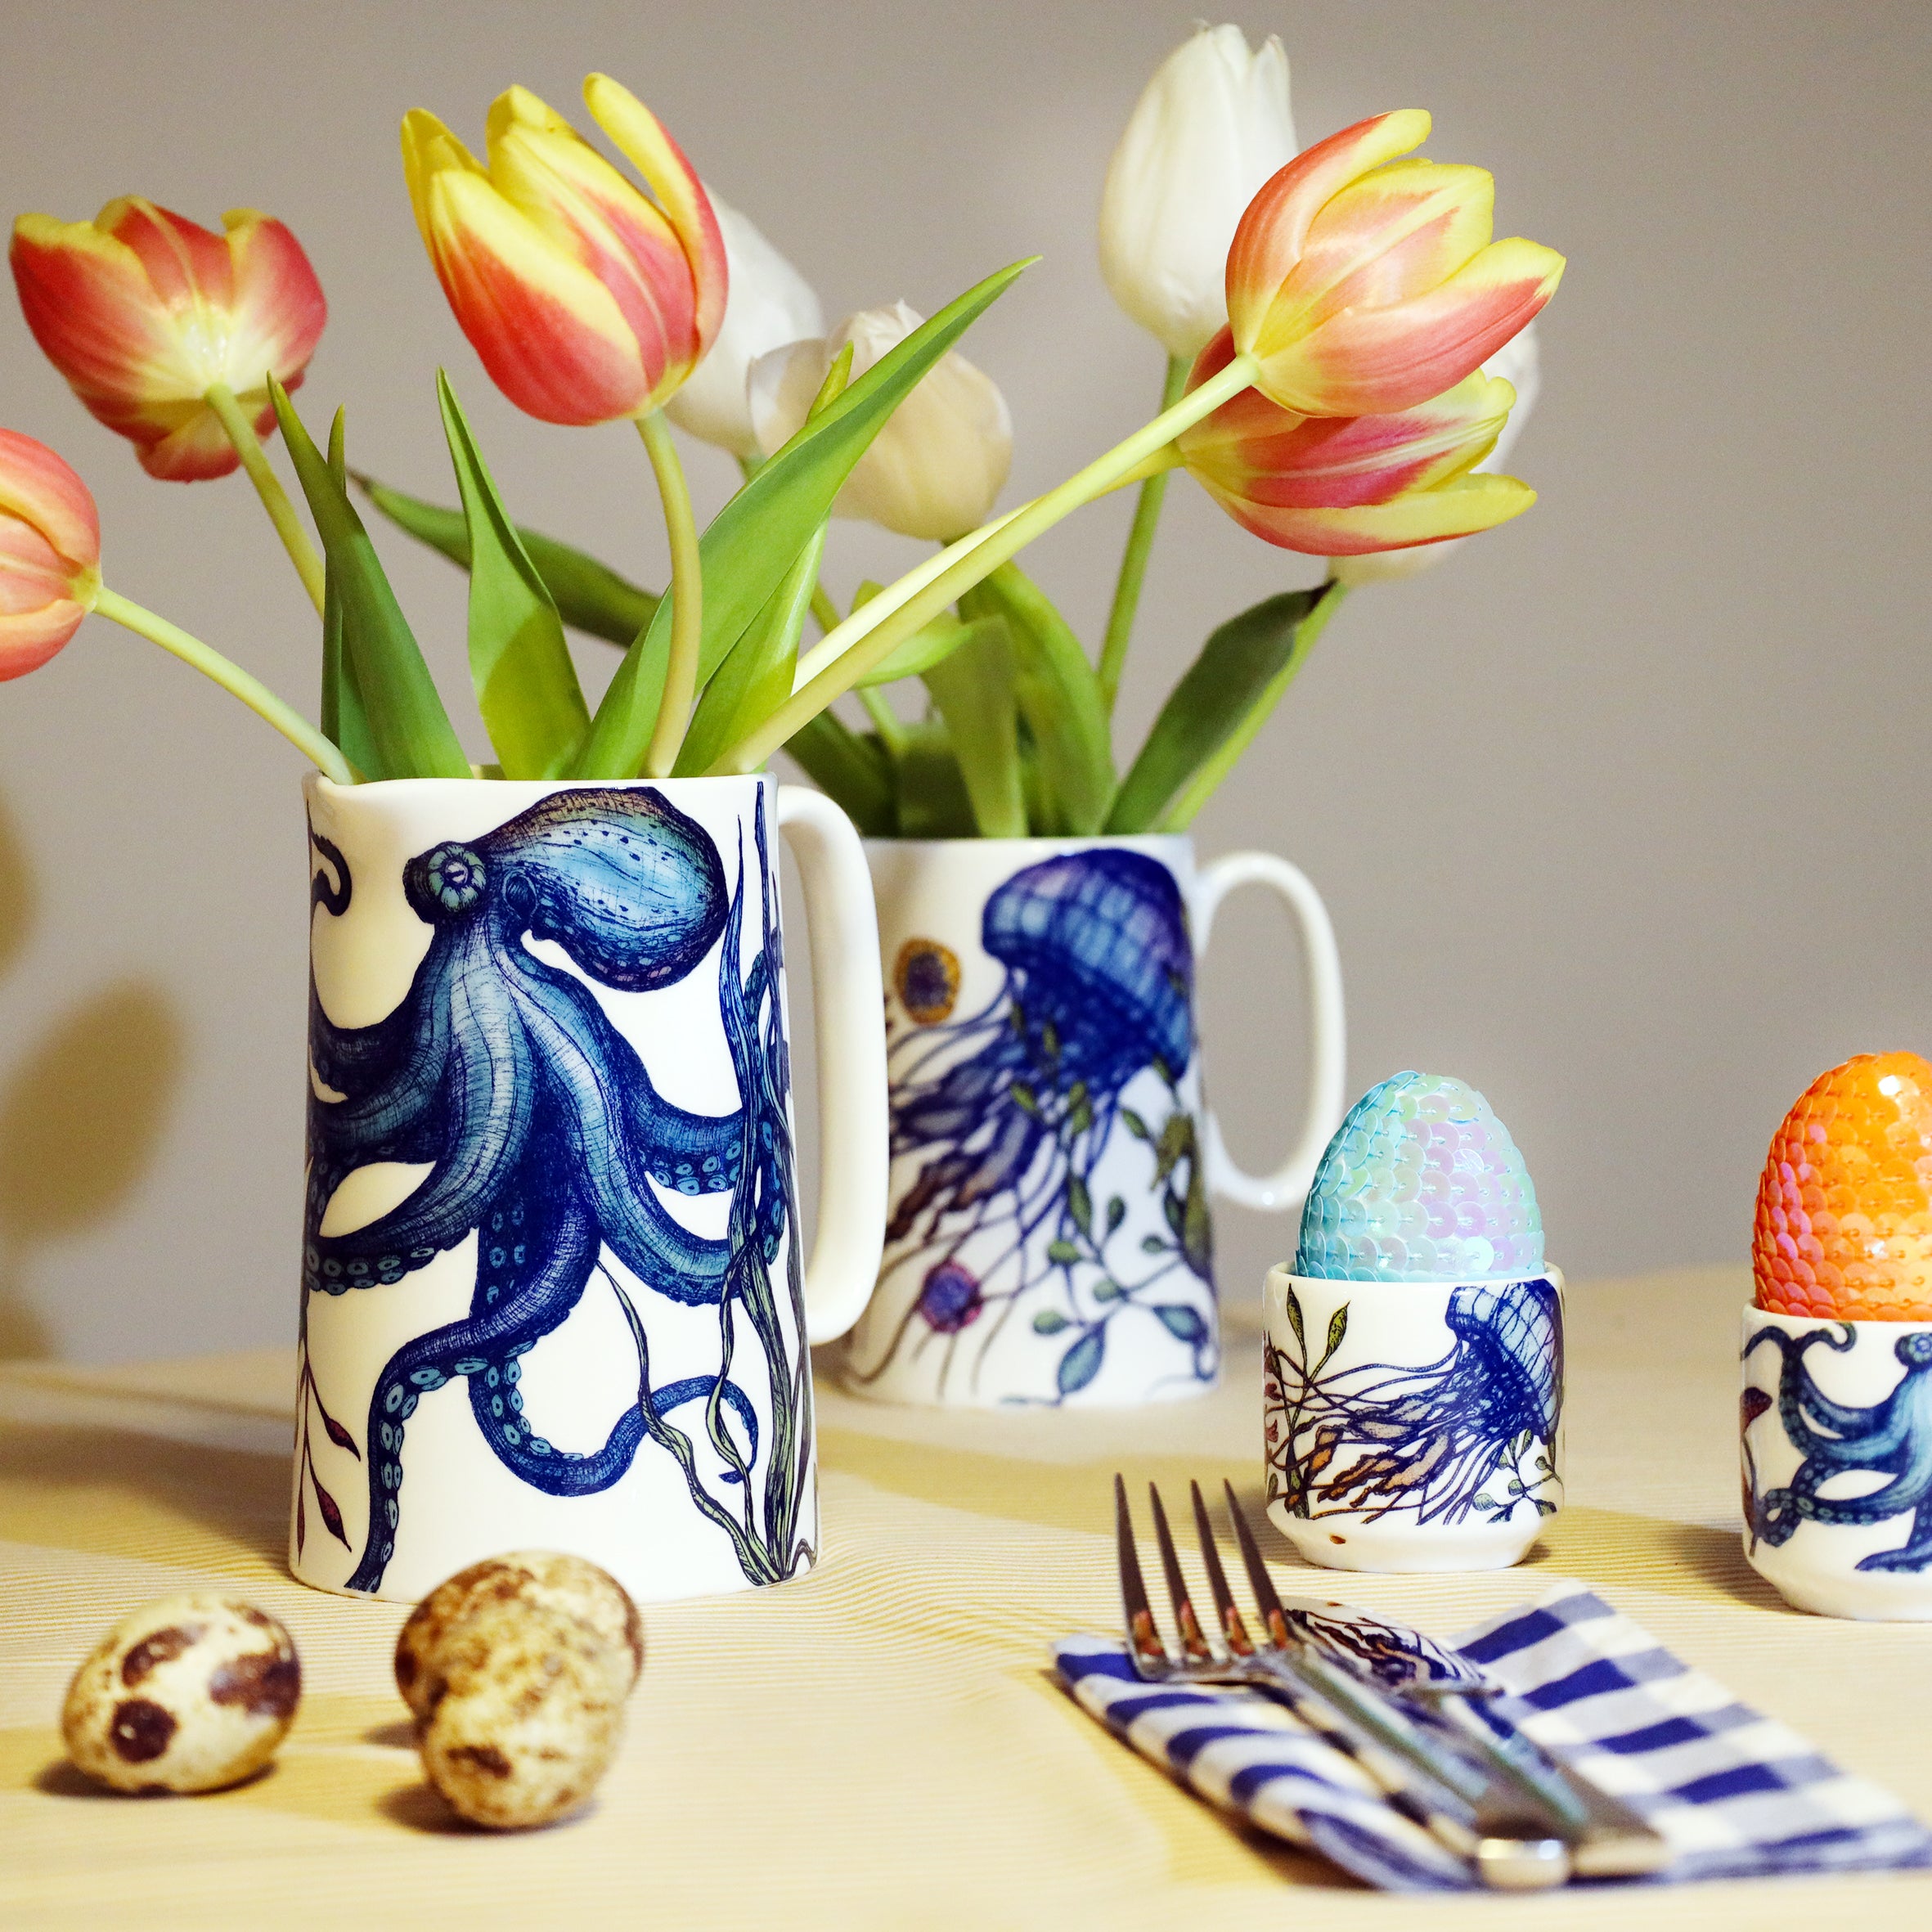 White jug with brightly coloured blue and green octopus with red and yellow tulips in. this is sitting on a yellow table with the same designed egg cups with sequined eggs in. There is a smaller jug from the same collection with a jellyfish on it in the background as well.